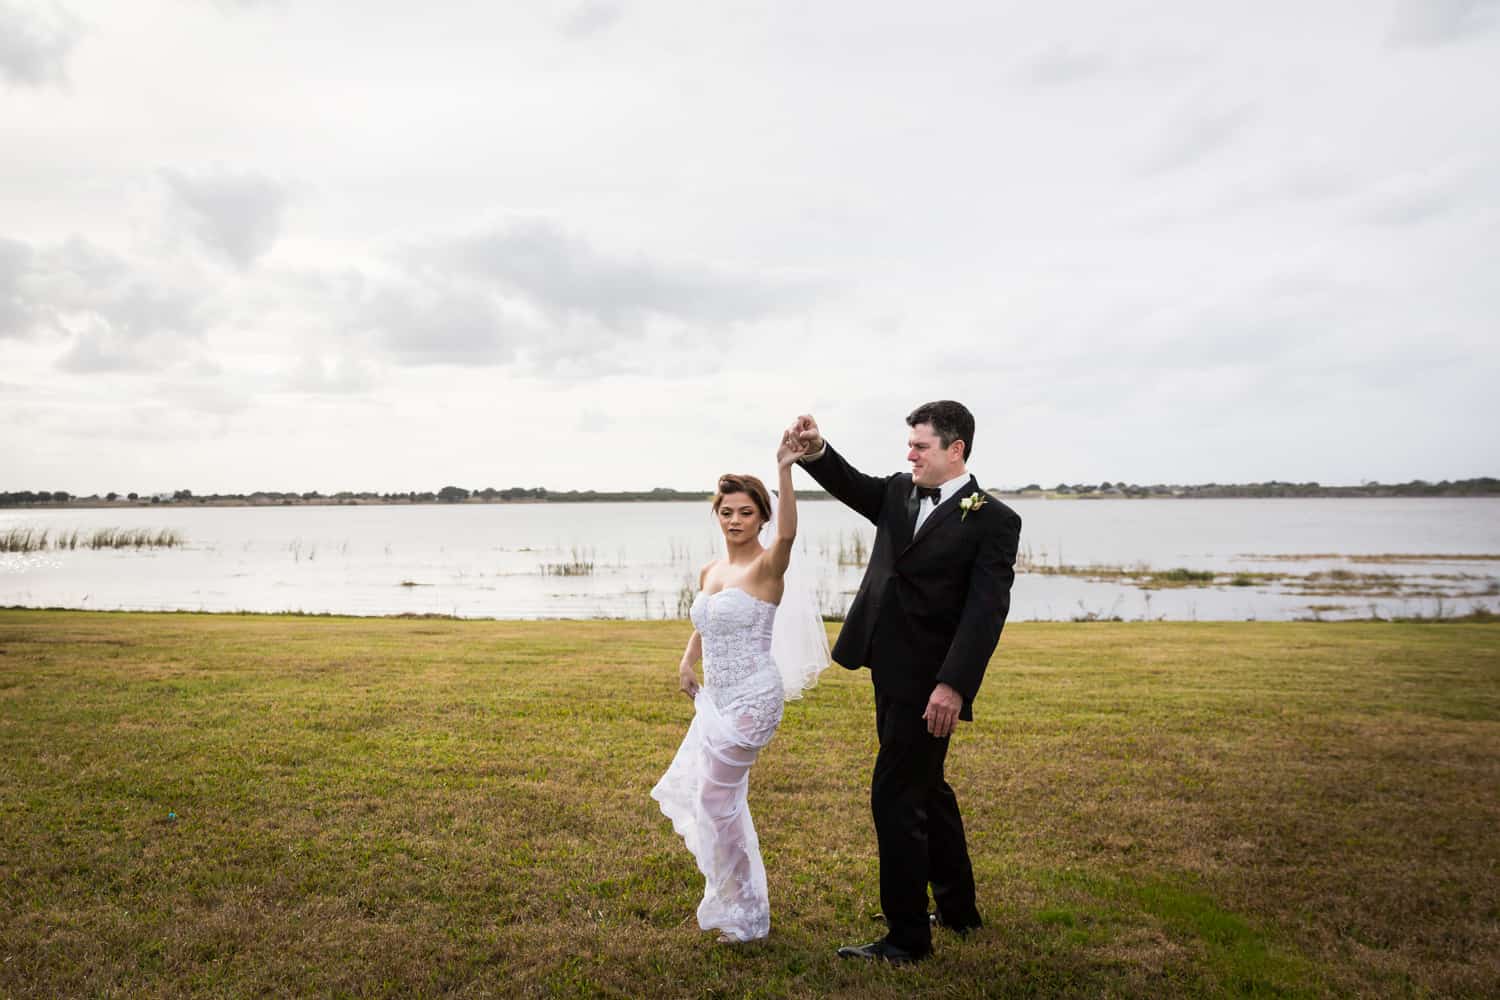 Bride and groom dancing in front of lake for an article on wedding cost cutting tips